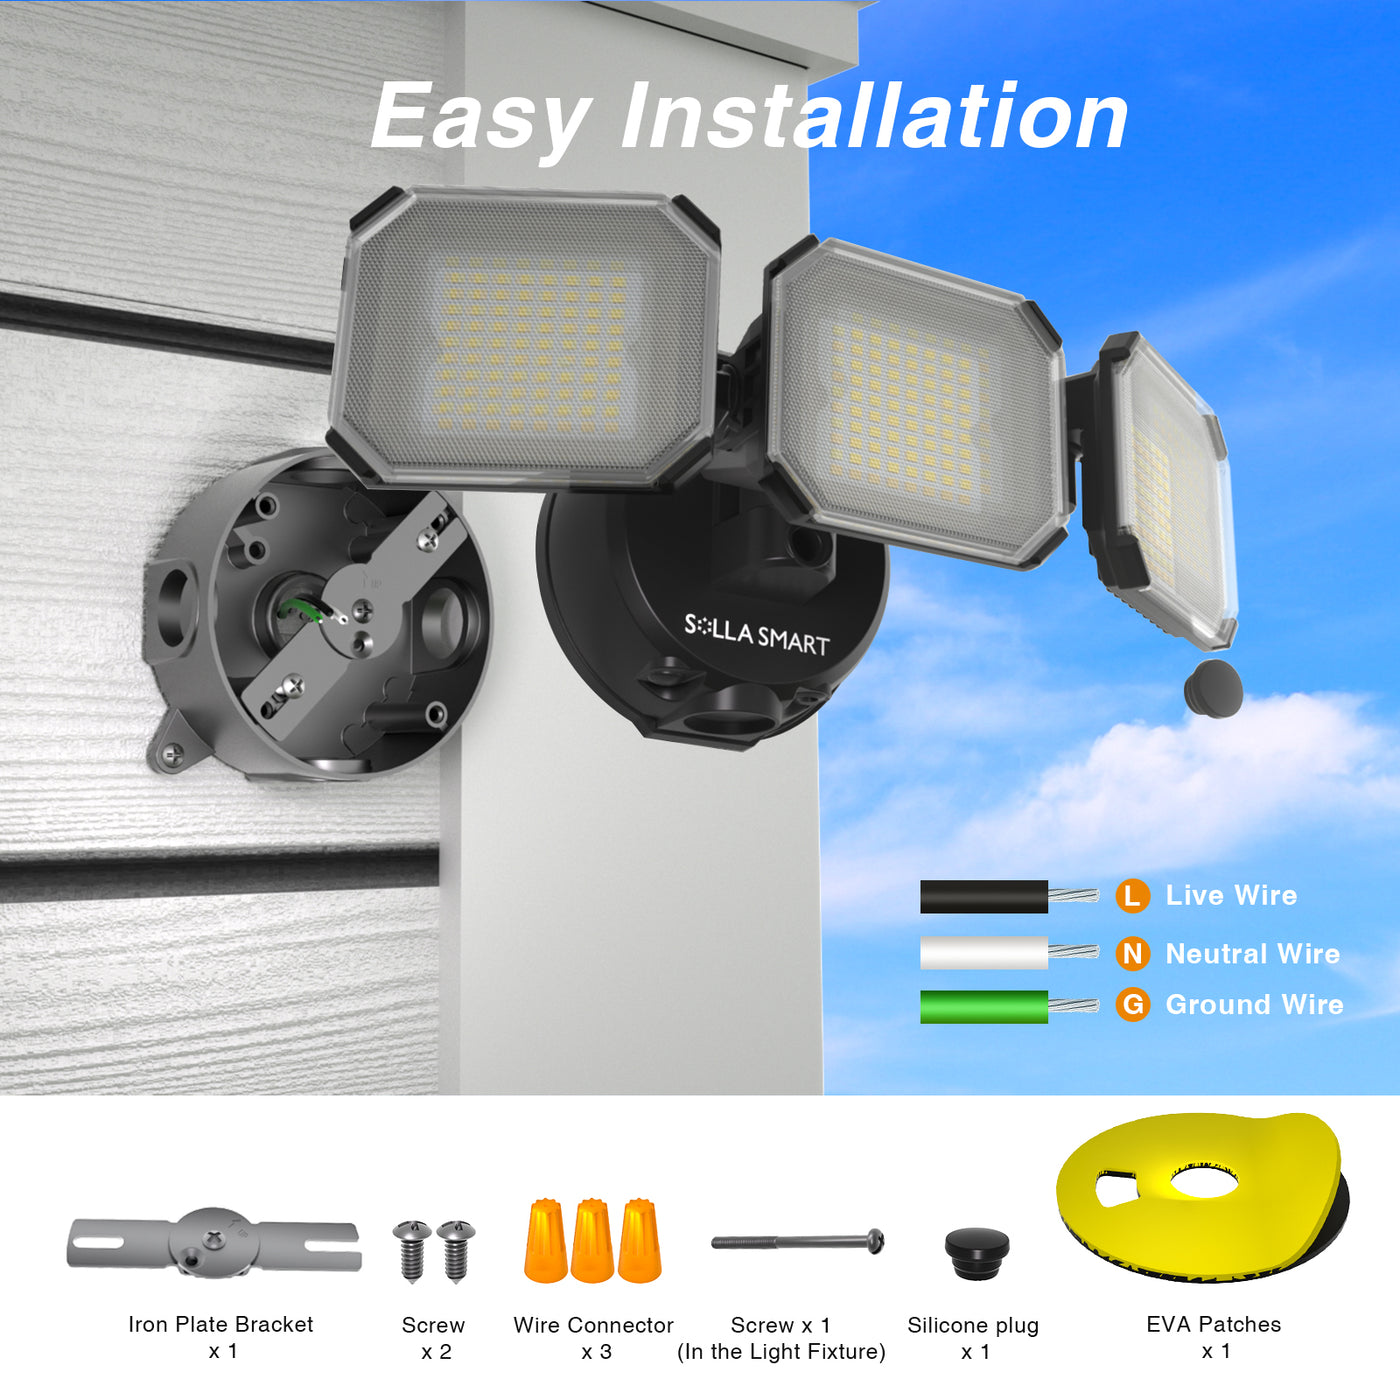 50W Dusk to Dawn Security Lights Outdoor, 7000LM Smart LED Floodlight, App Control Tunable White 2700K-6500K, IP65 Waterproof 3 Adjustable Heads Exterior Floodlights for Garage, Yard, Porch